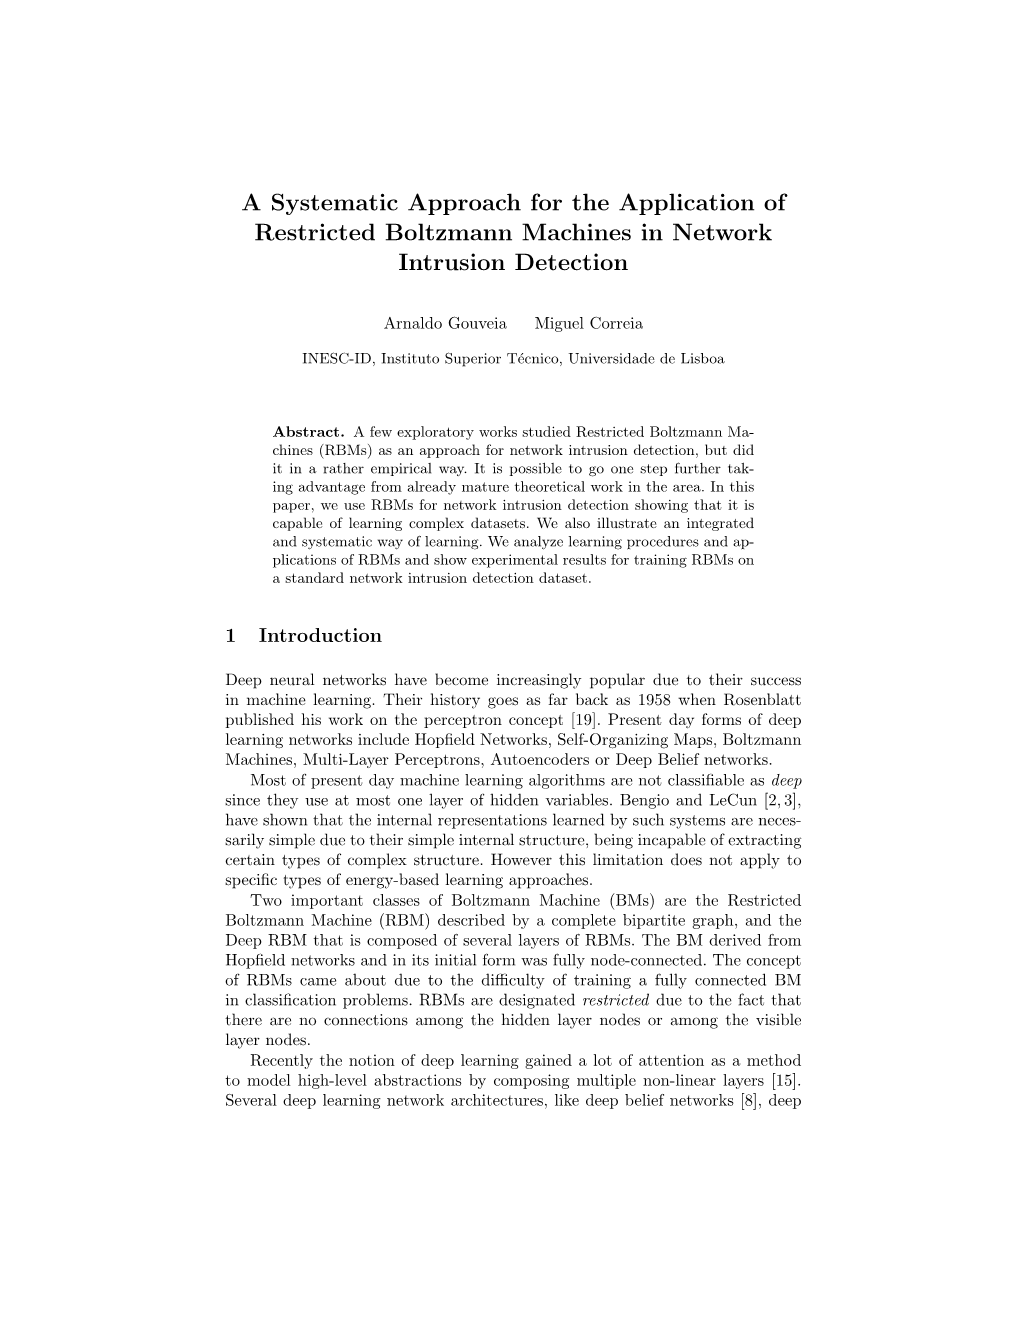 A Systematic Approach for the Application of Restricted Boltzmann Machines in Network Intrusion Detection